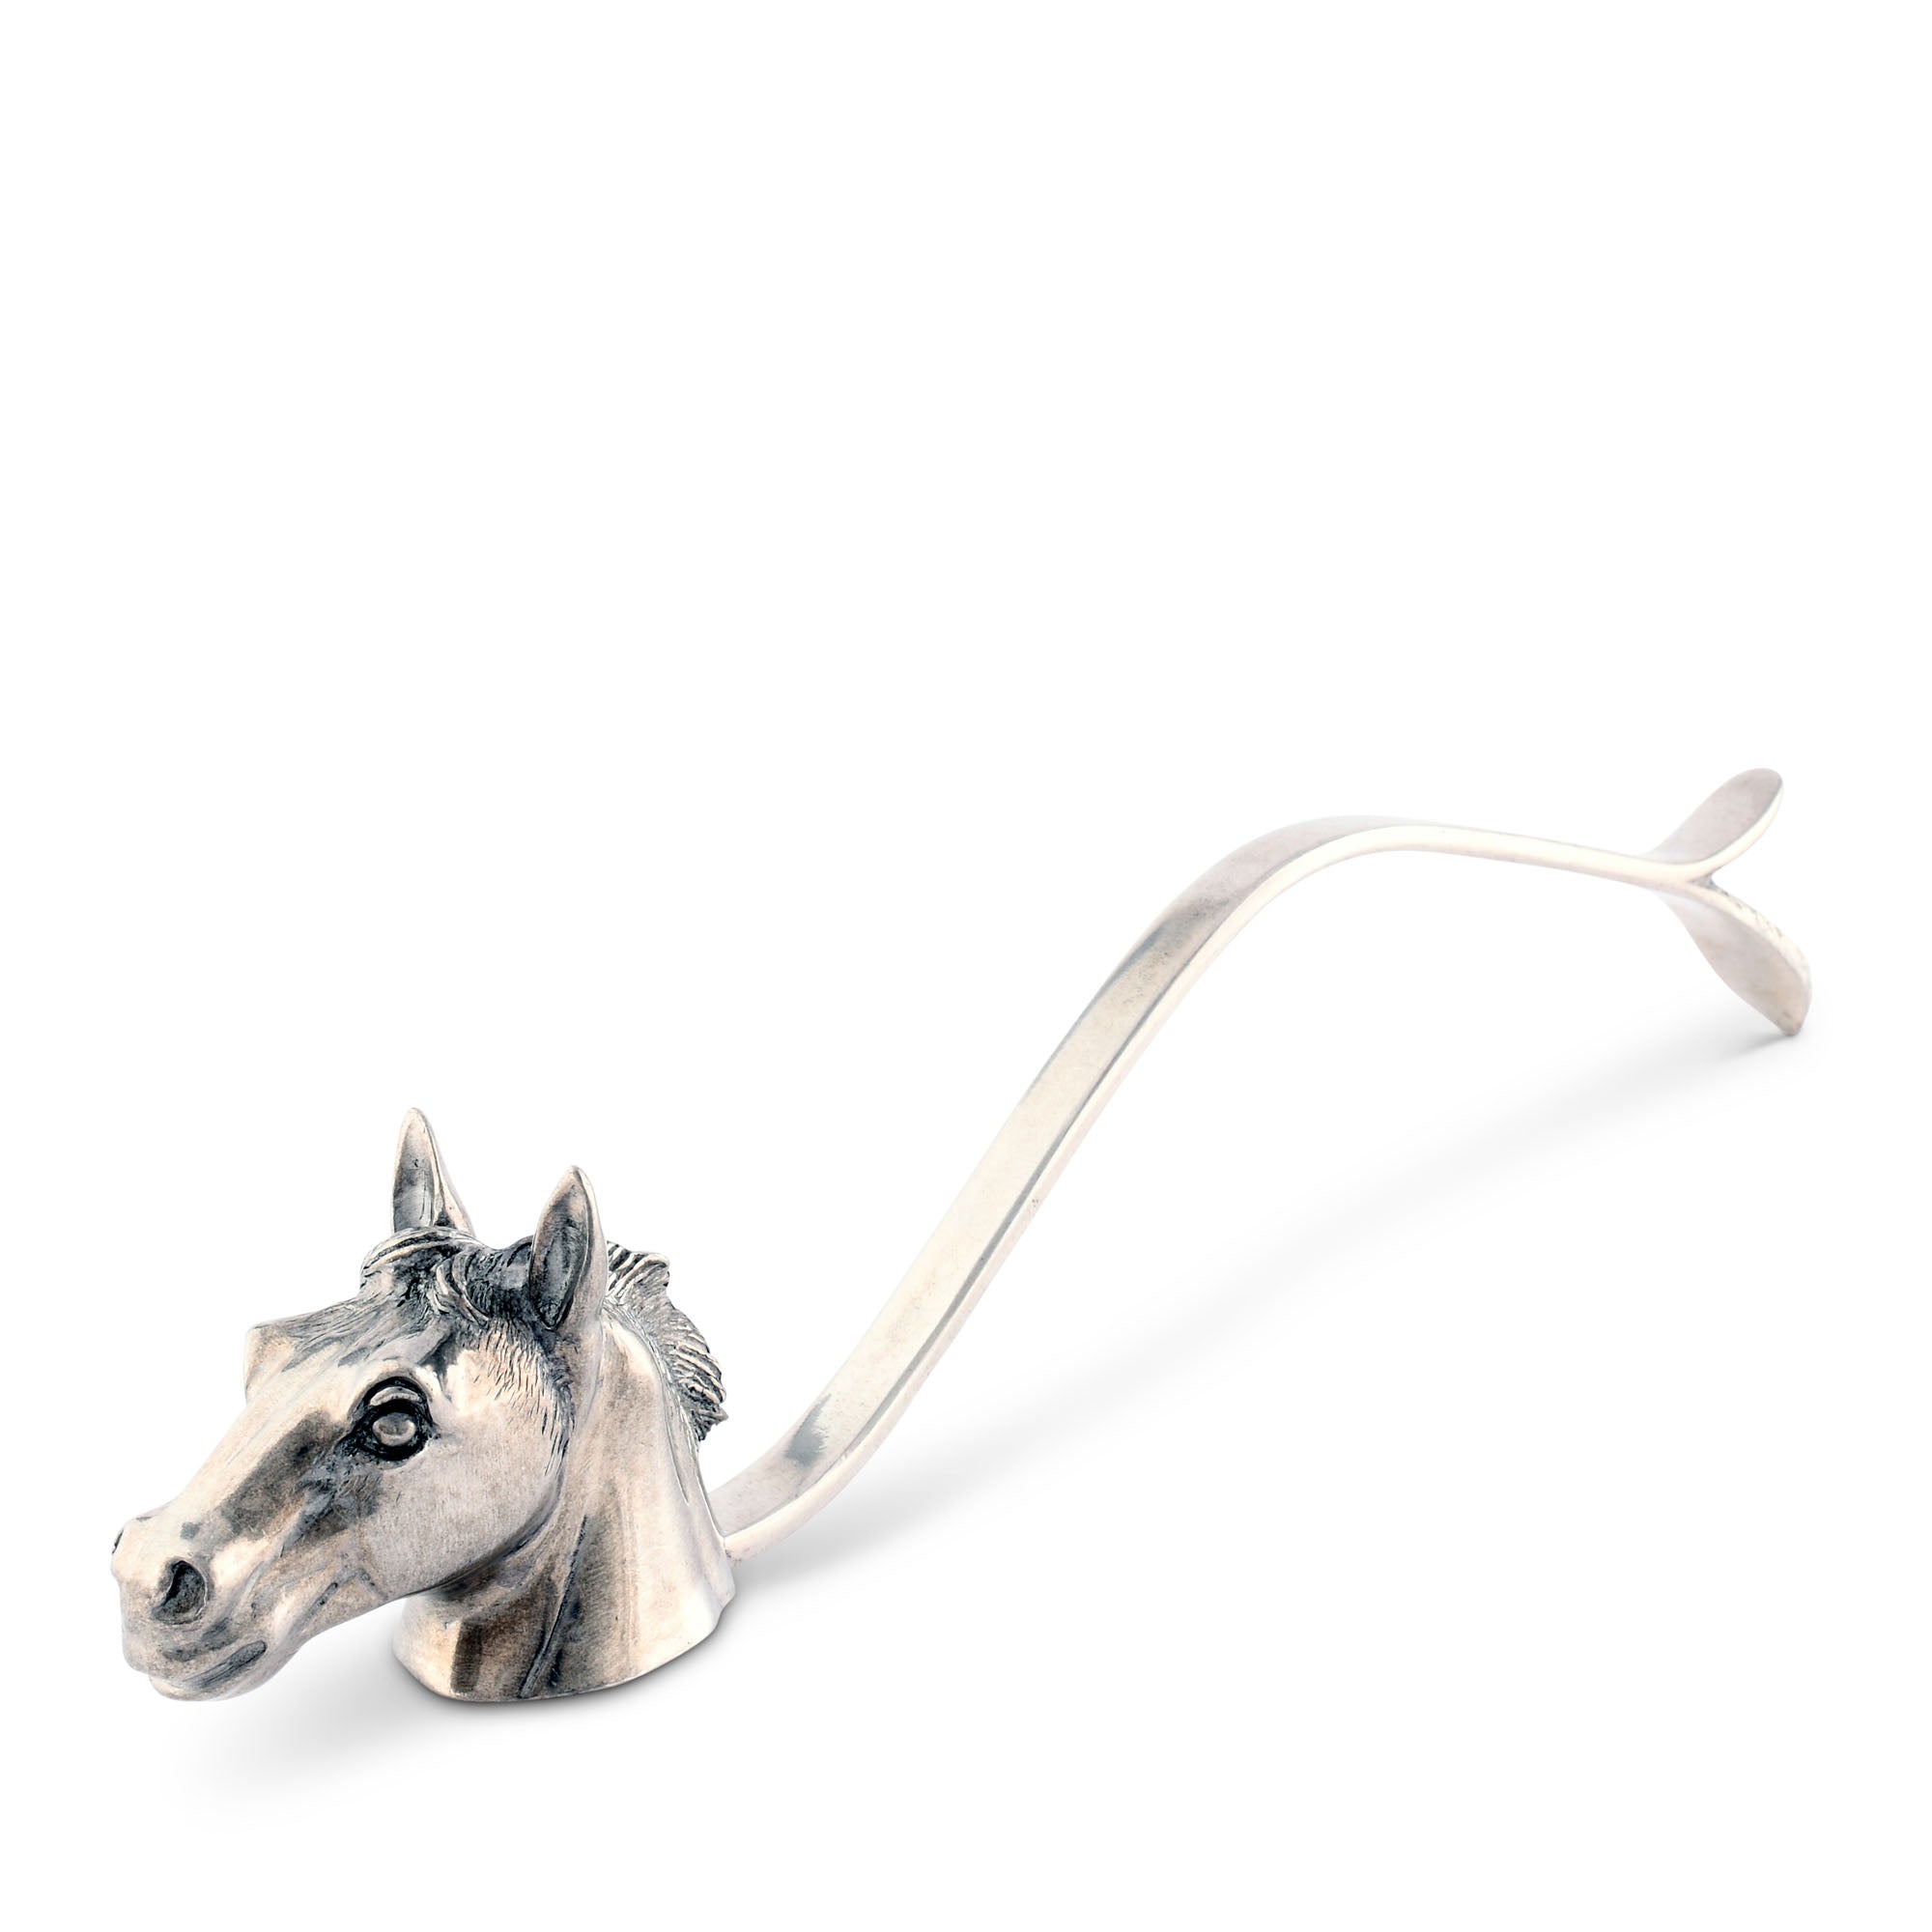 Vagabond House Horse Candle Snuffer Product Image